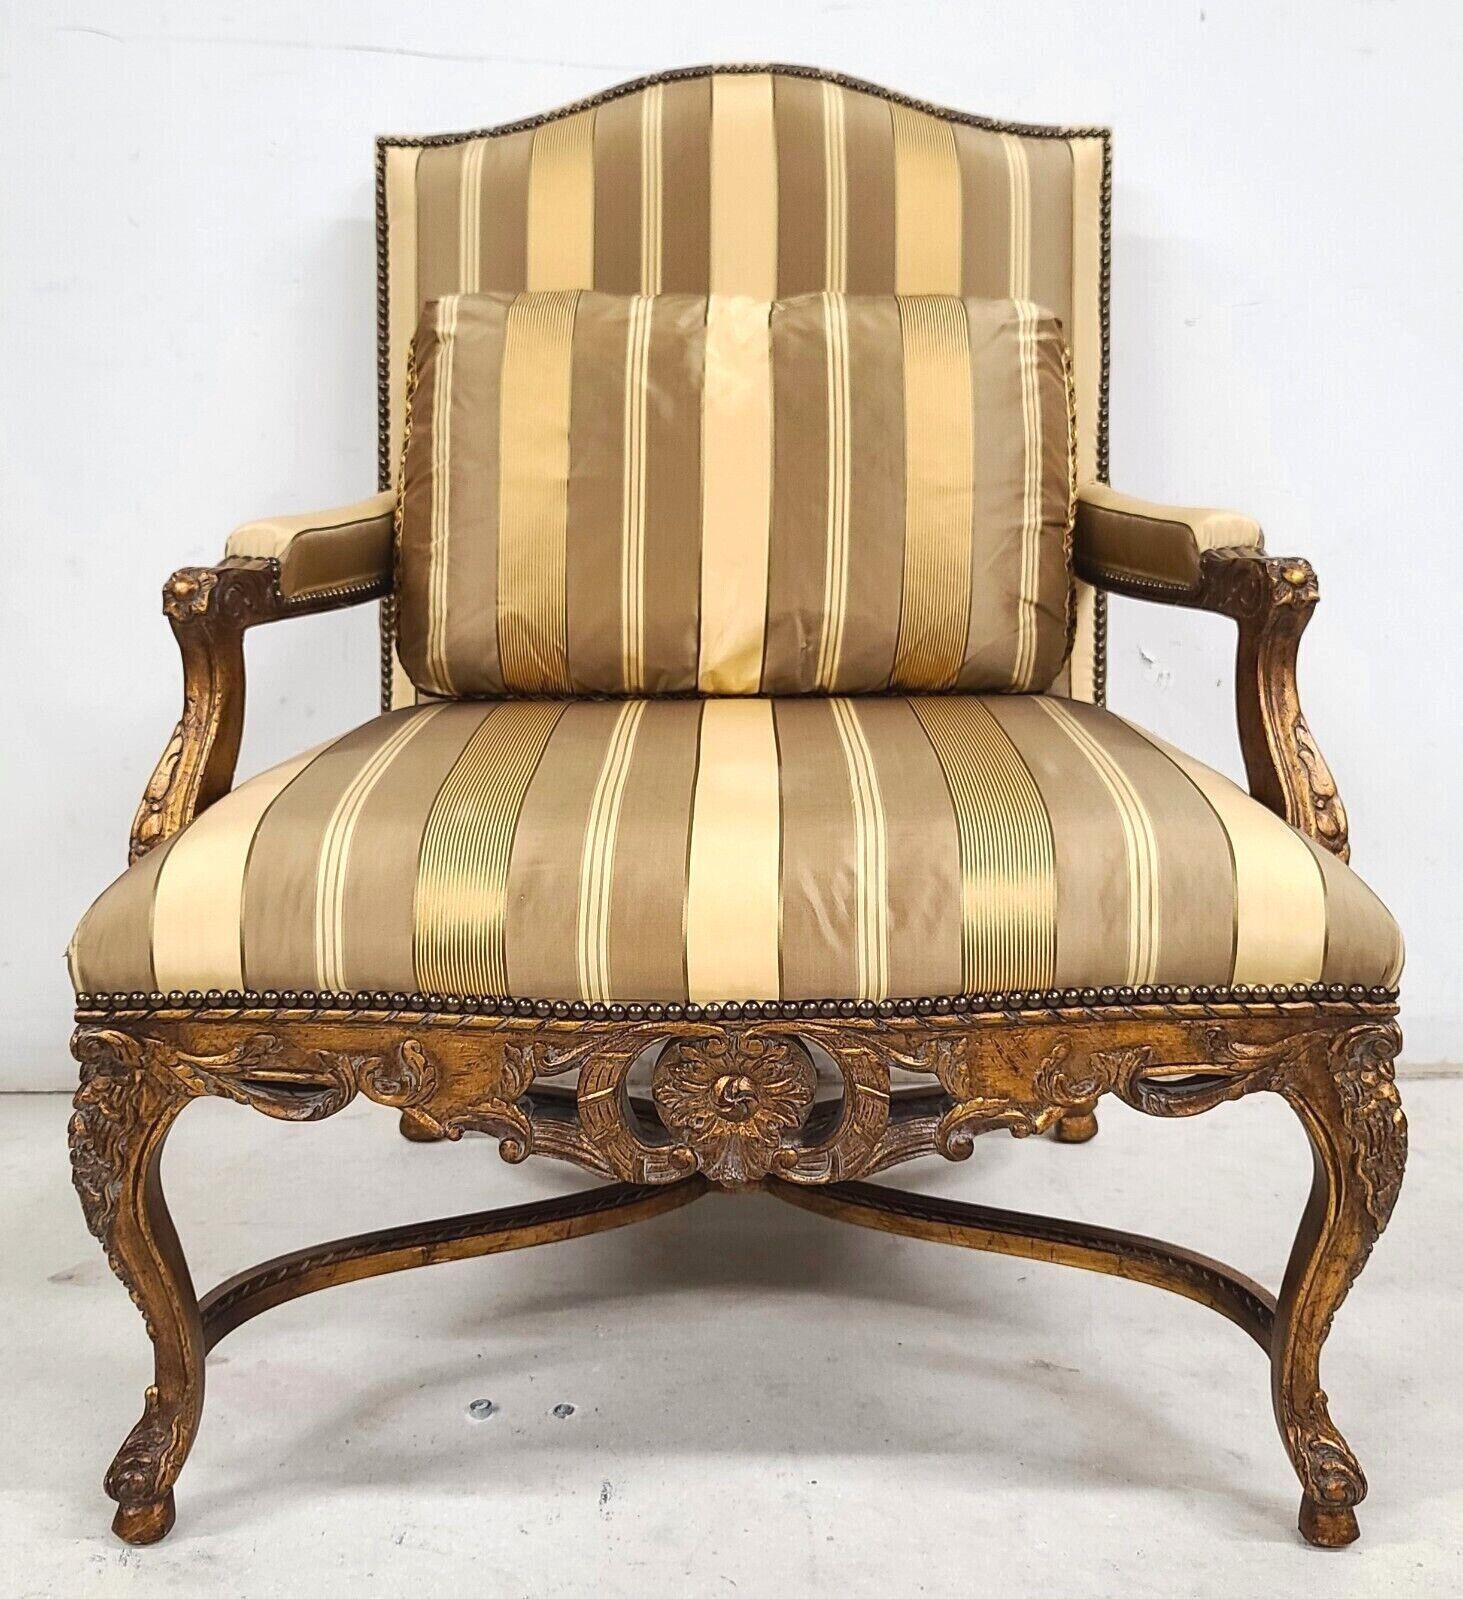 20th Century French Provincial Louis XV Giltwood Bergere Armchair by Robb Stucky